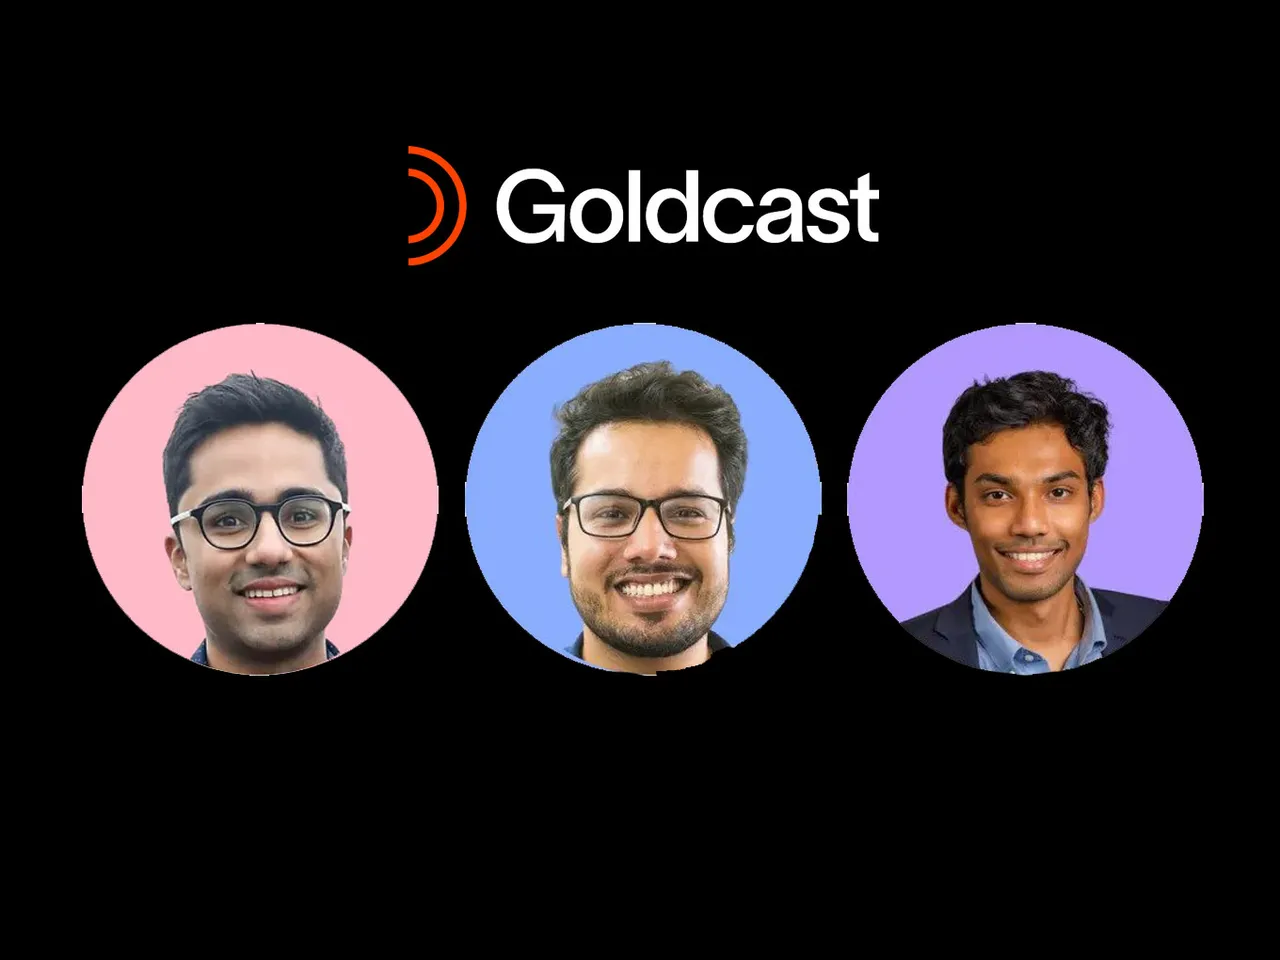 Boston-based Goldcast raises $28M in funding to empower B2B marketers to turn events into revenue